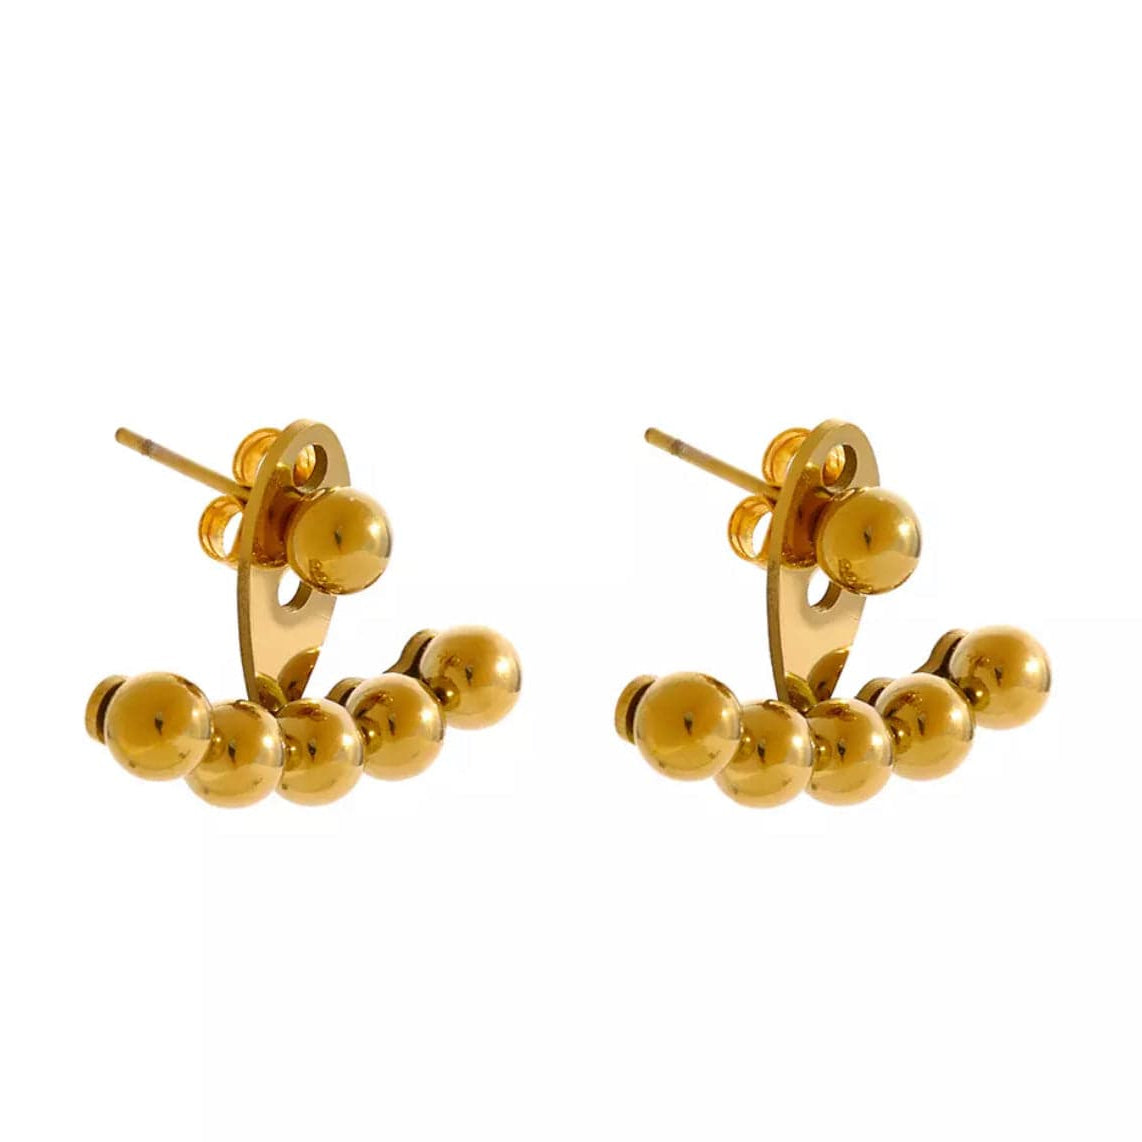 Dona Trend Jewelry Gold Spheres Earrings